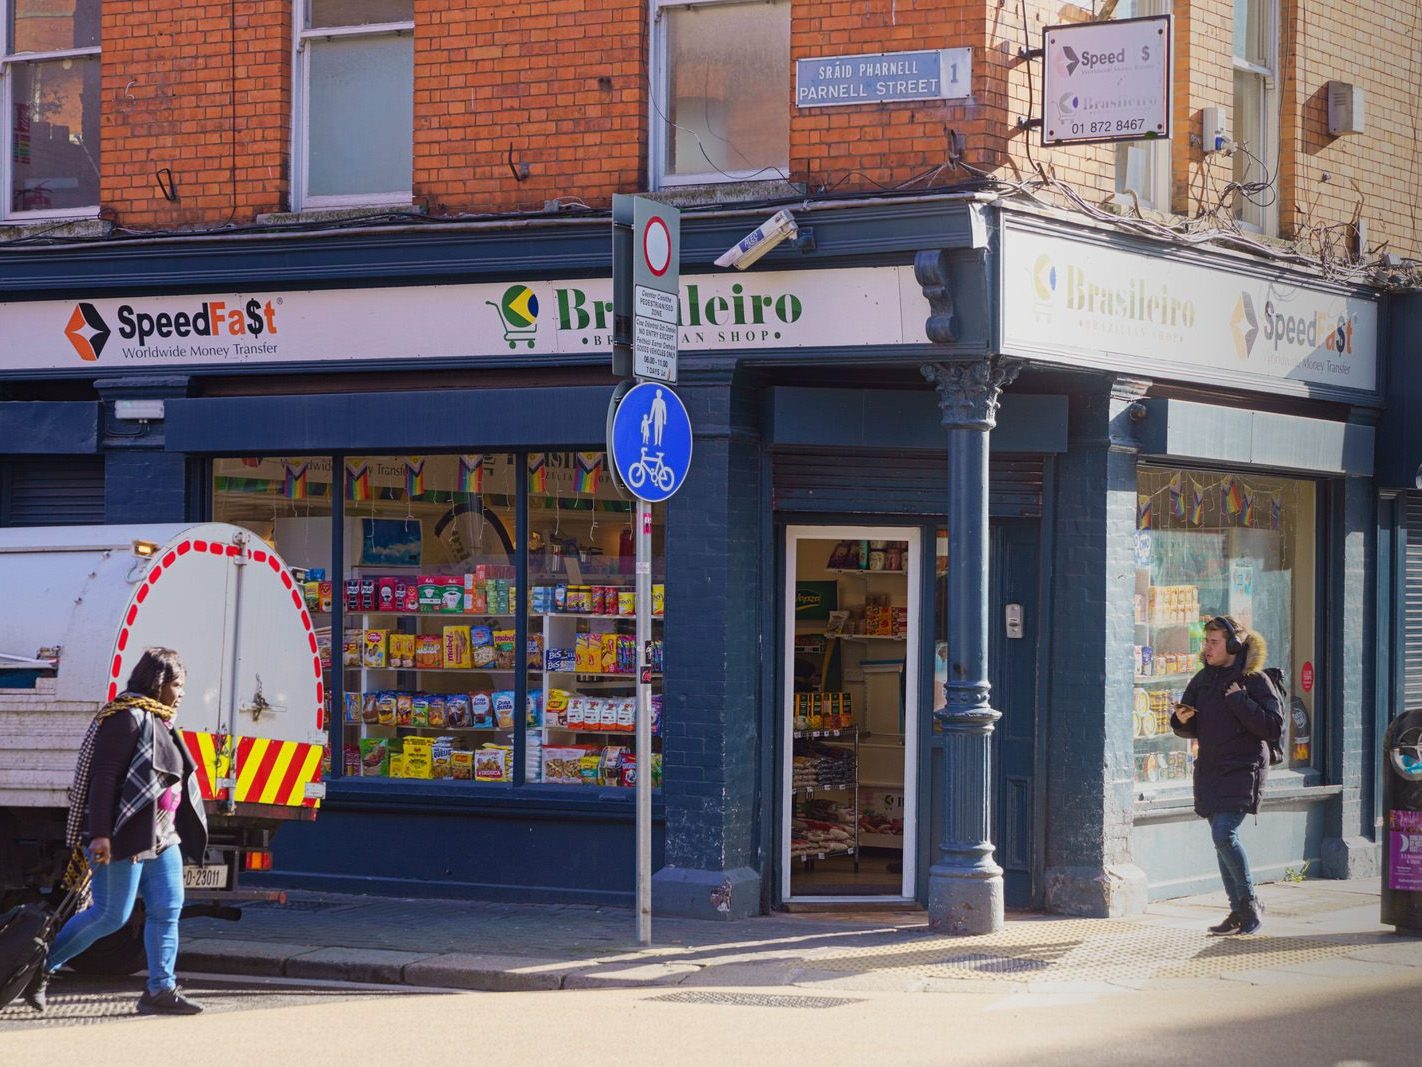 CAPEL STREET IS STILL A W.I.P. [THE PERIOD BETWEEN HALLOWEEN AND CHRISTMAS]-224786-1